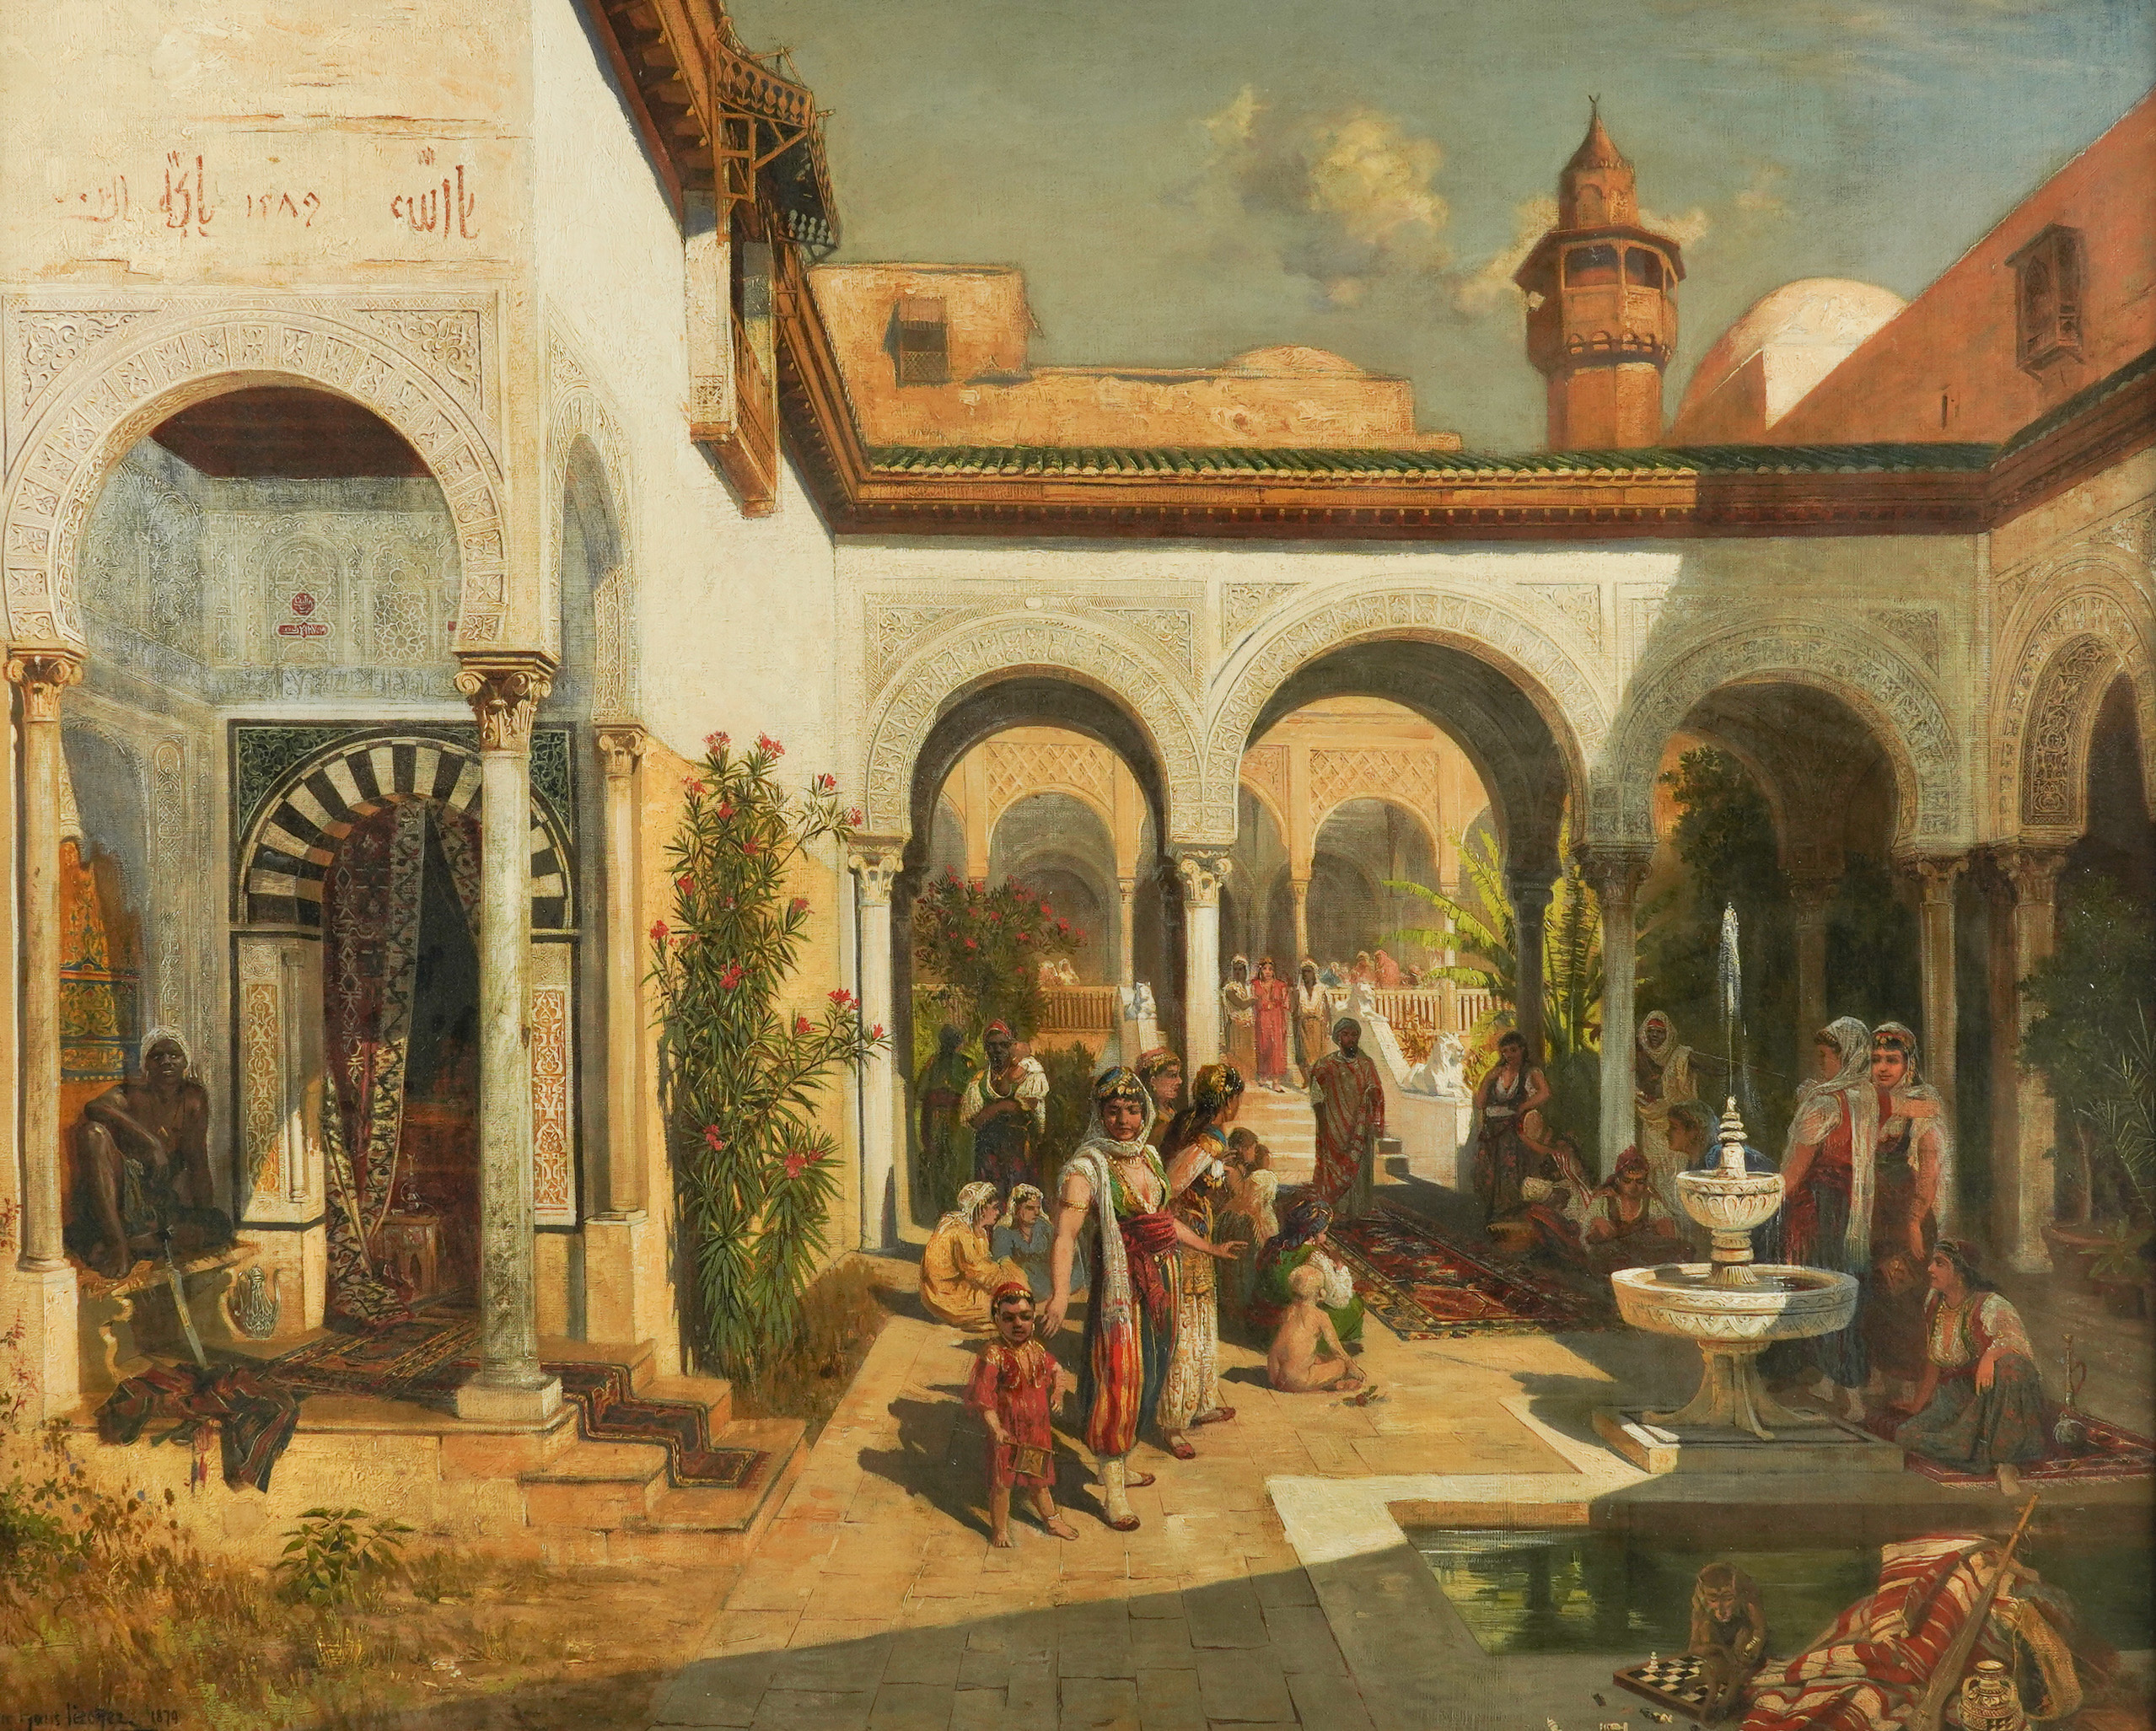 Ludwig Hans Fischer (Austrian, 1848-1915), “The Courtyard,” oil on canvas, 86 x 107cm, signed and dated 'Ludwig Hans Fischer 1879' (lower left)